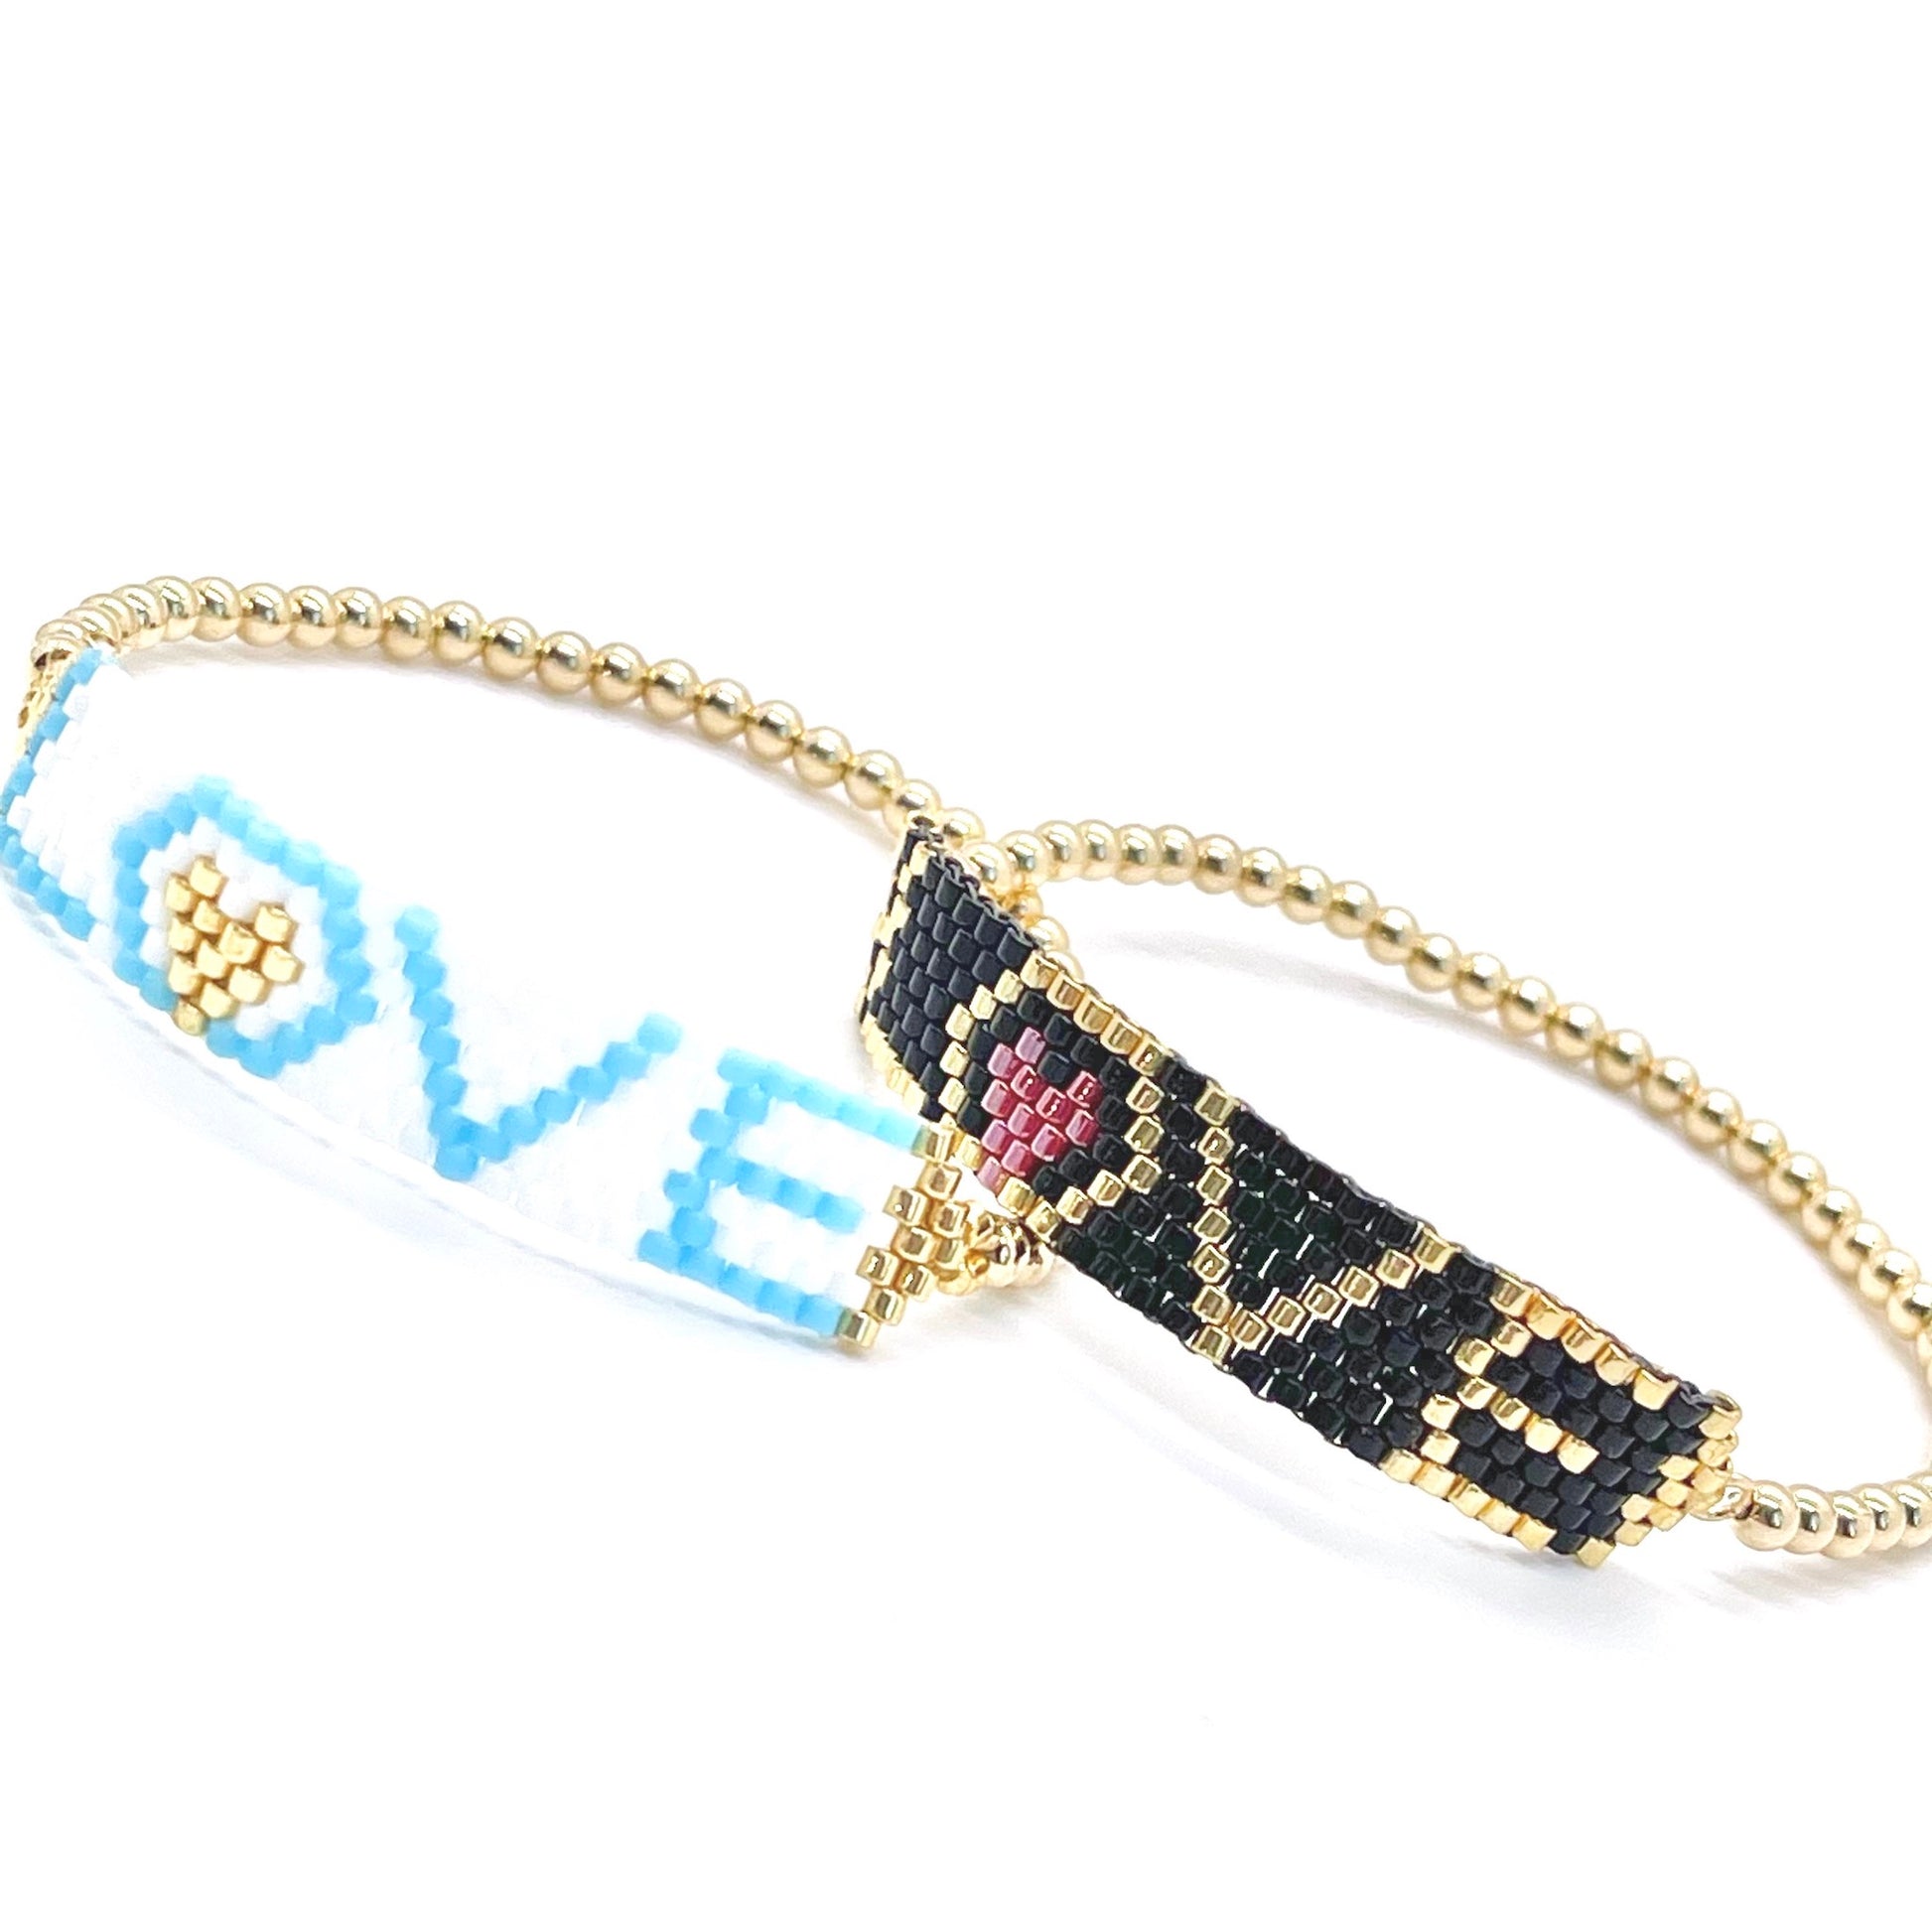 Stacking love bracelets with white, black, blue, and gold beads. Gold stretch bracelets.